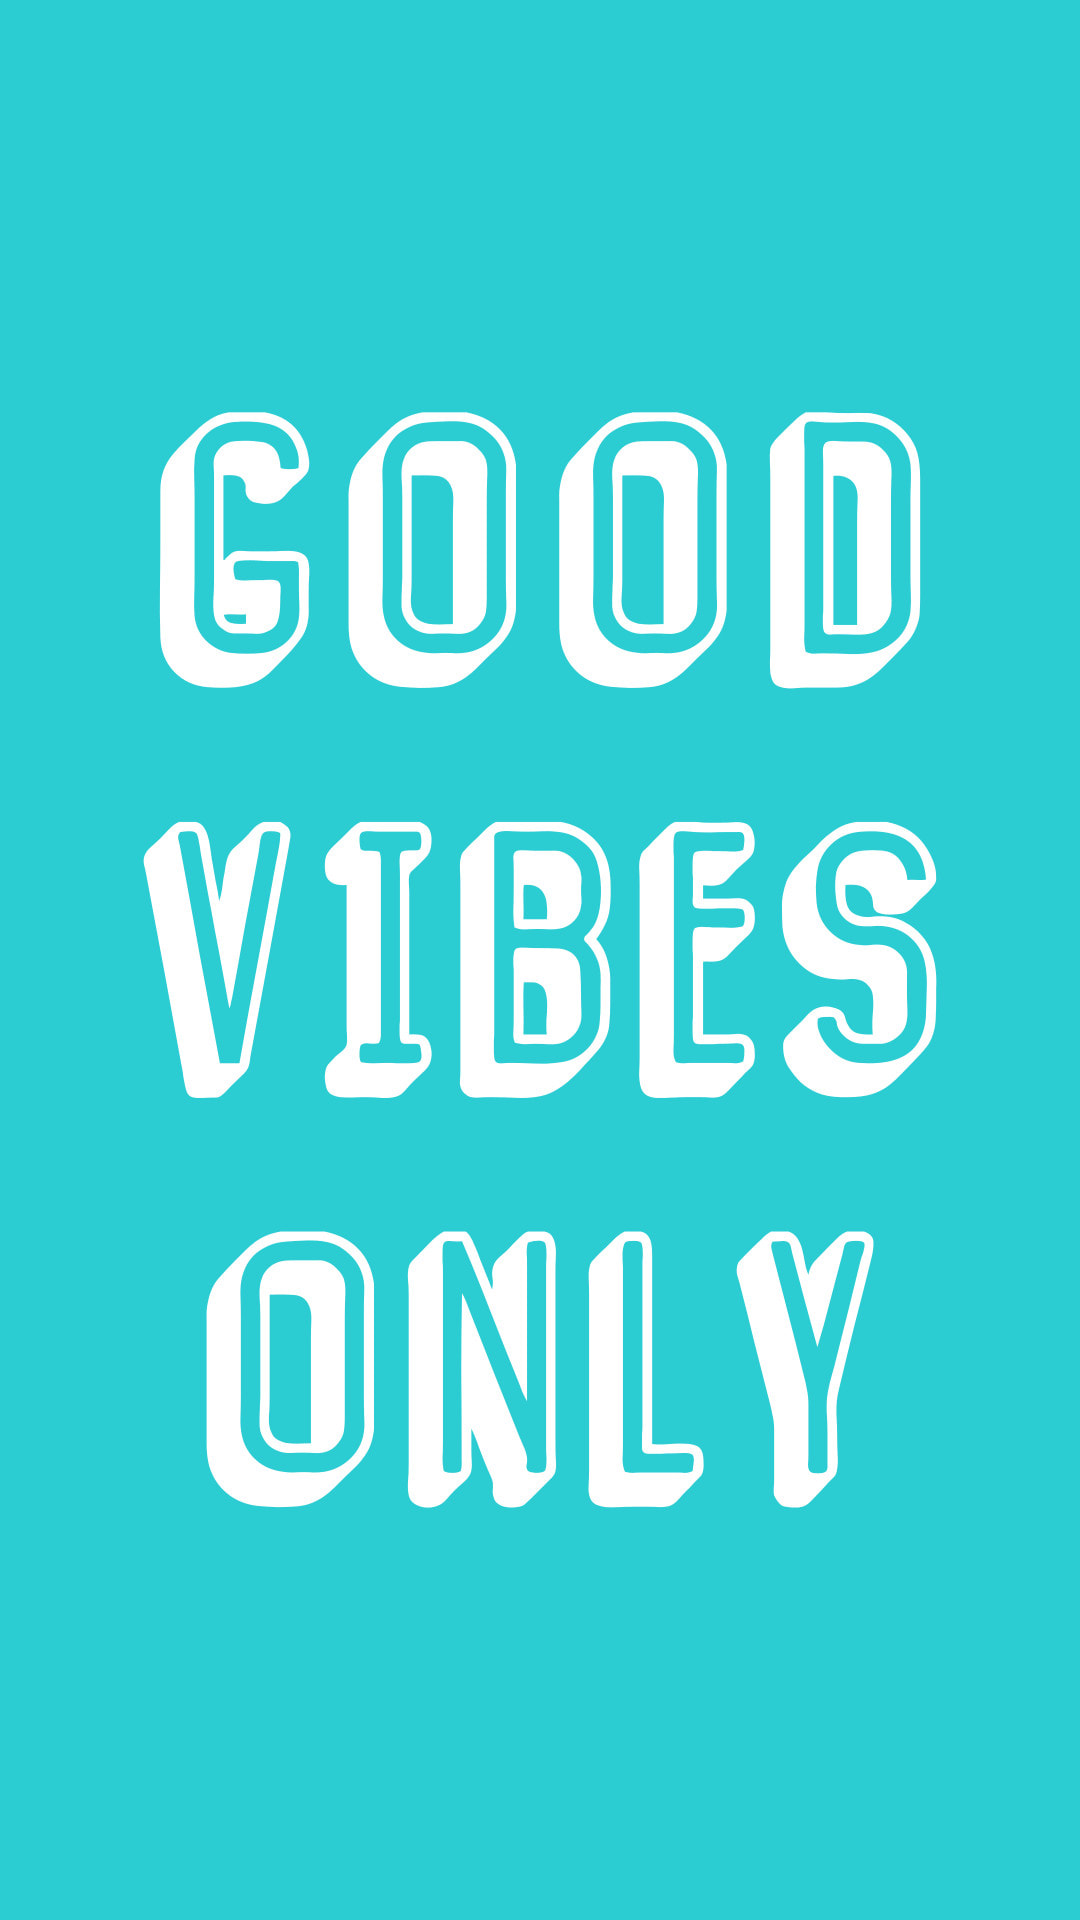 Positive vibes only Stock Photo Images. 4,748 Positive vibes only royalty  free images and photography available to buy from thousands of stock  photographers.